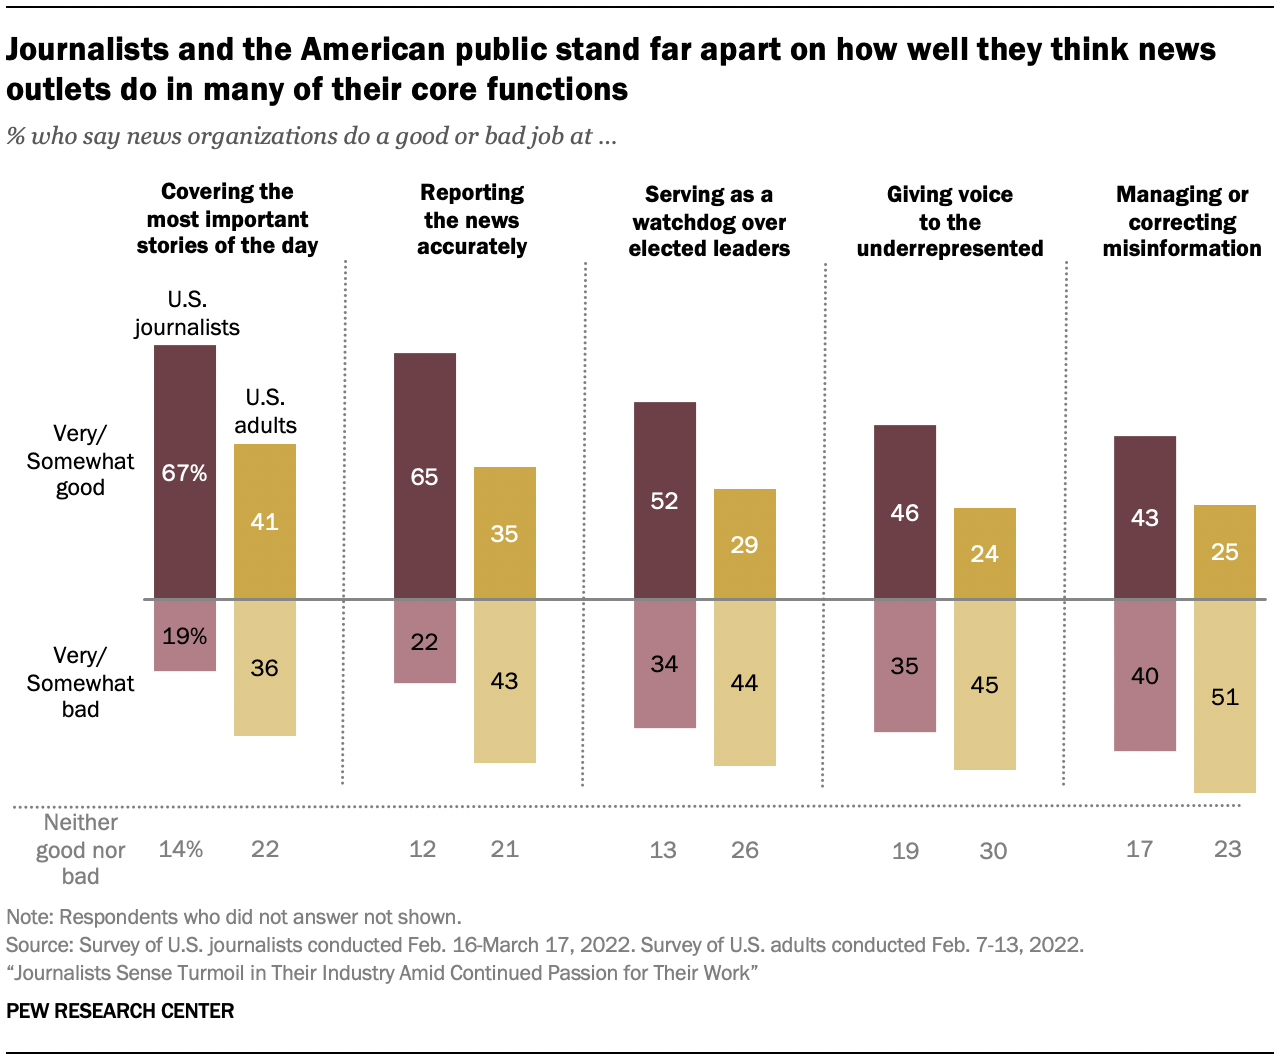 A chart saying that Journalists and the American public stand far apart on how well they think news outlets do in many of their core functions